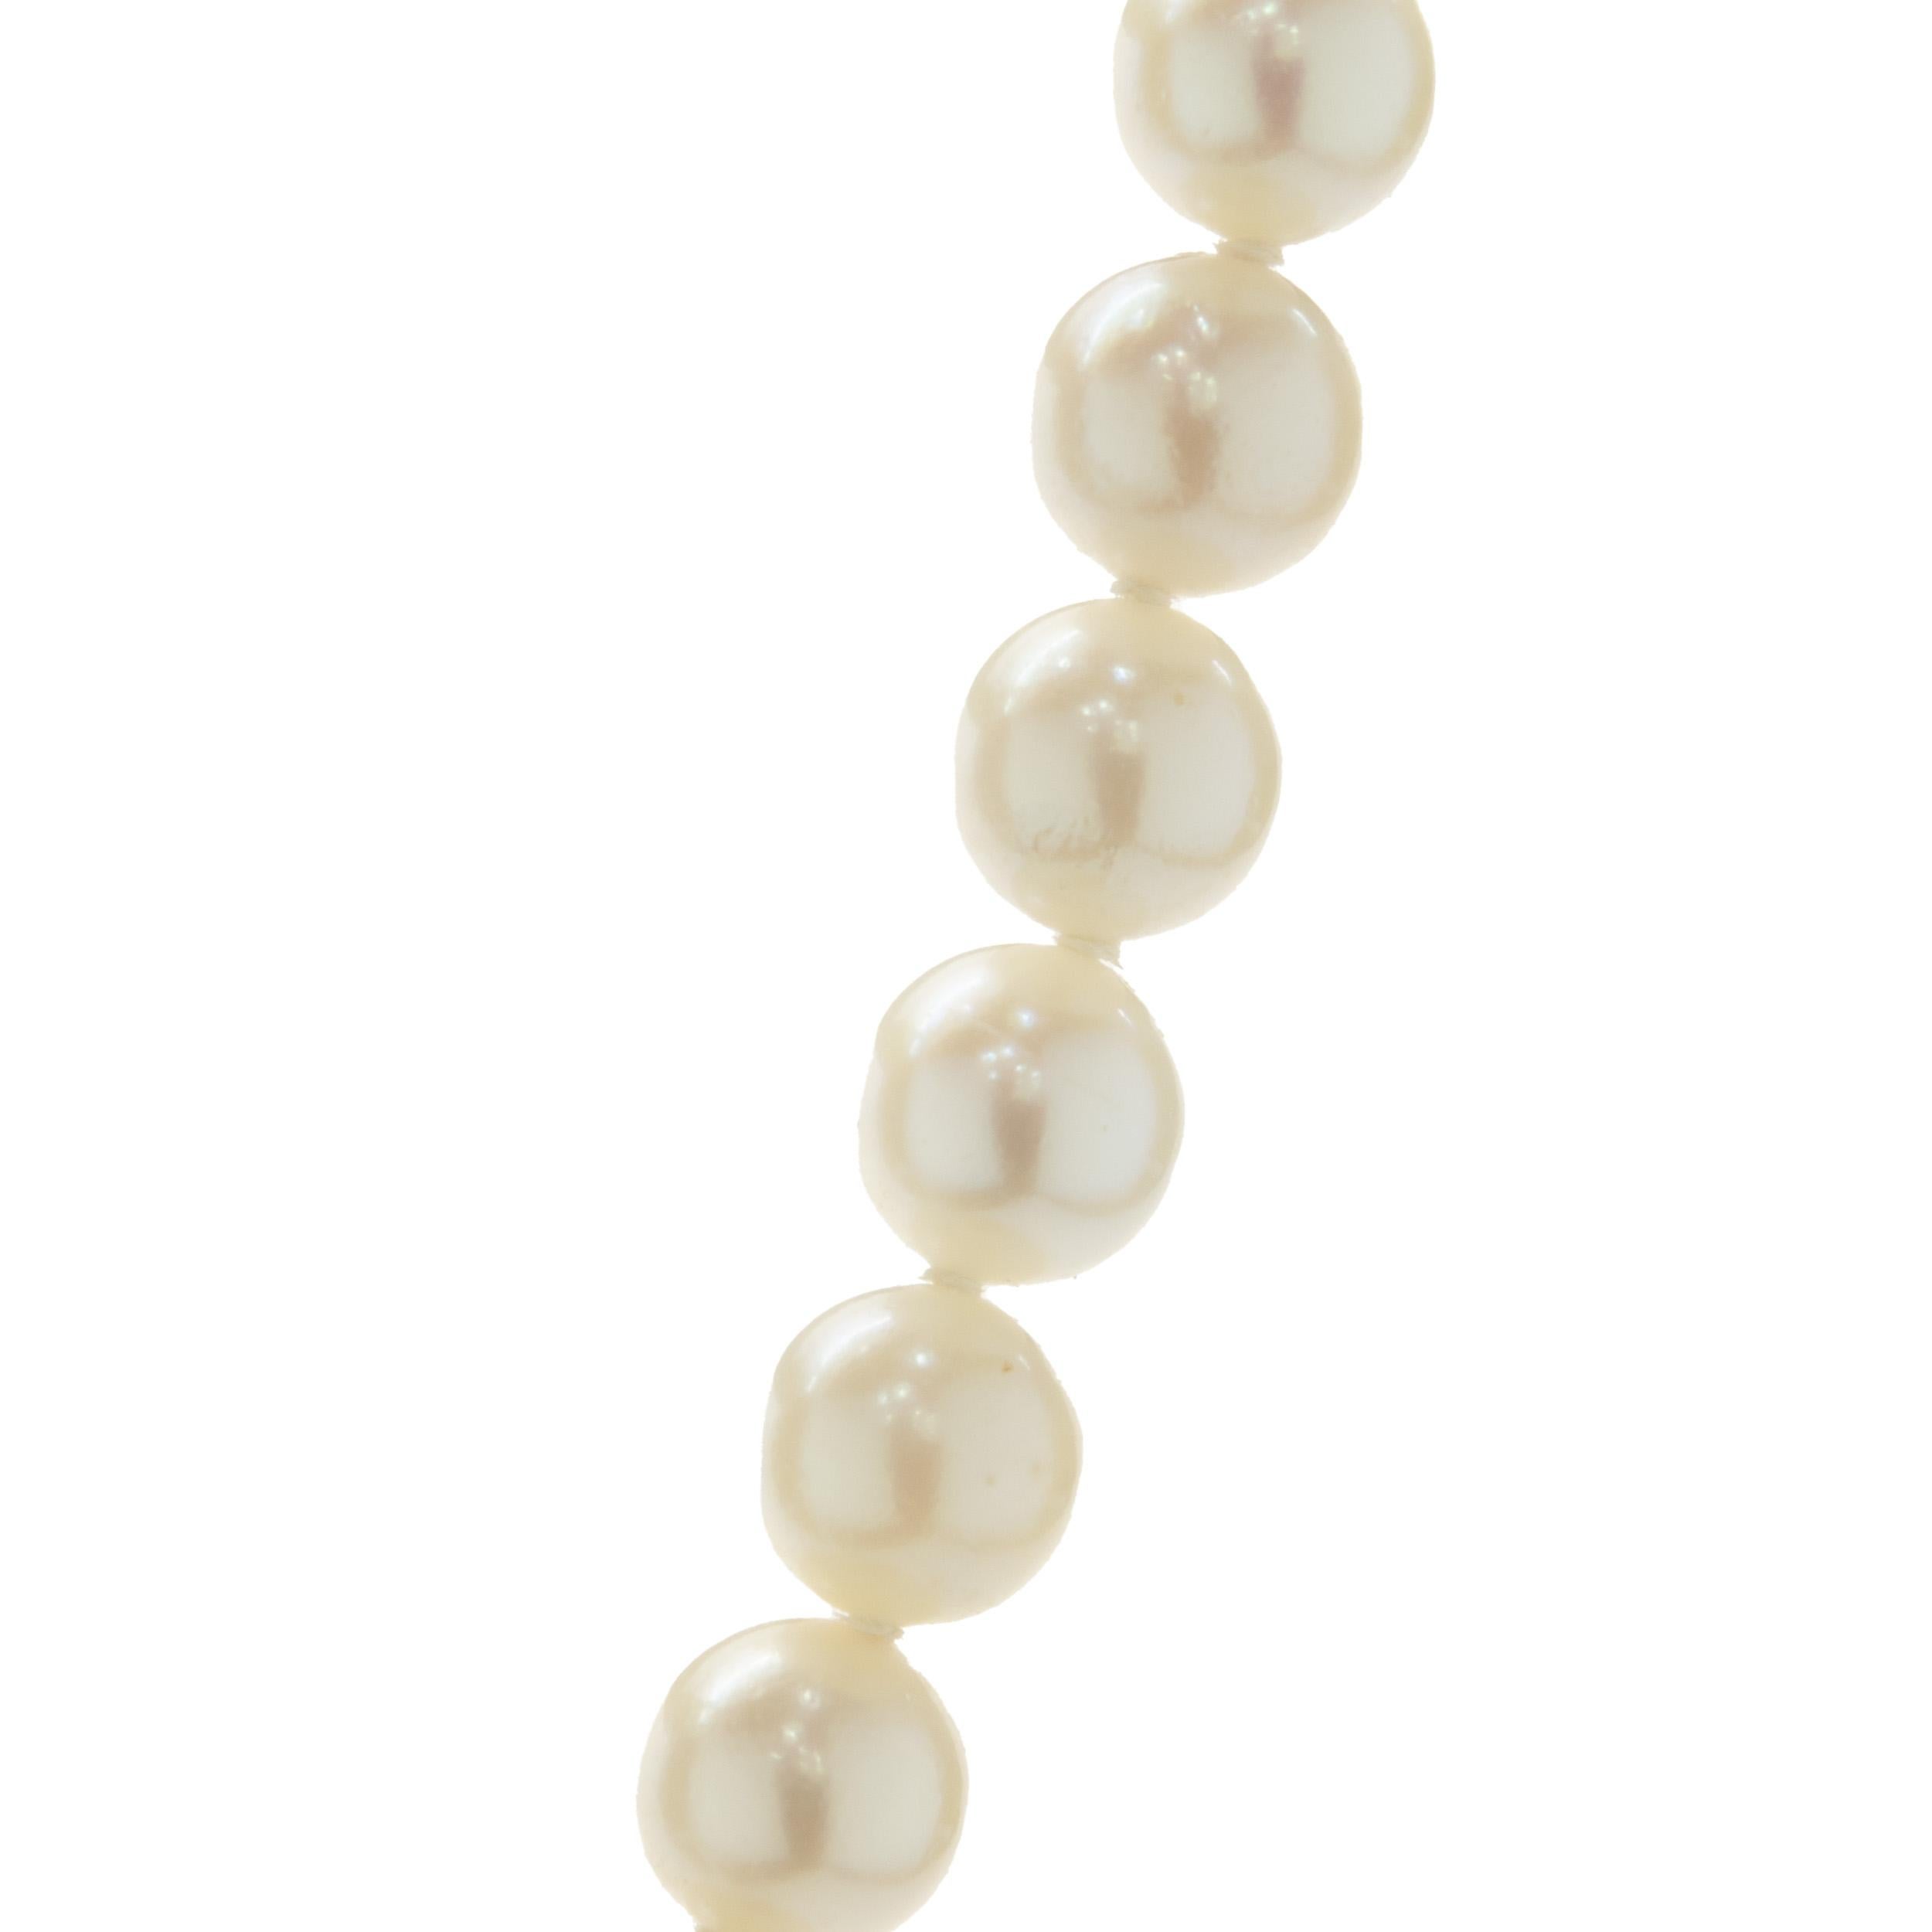 Freshwater Pearl Necklace with 14 Karat Yellow Gold Clasp In Excellent Condition For Sale In Scottsdale, AZ